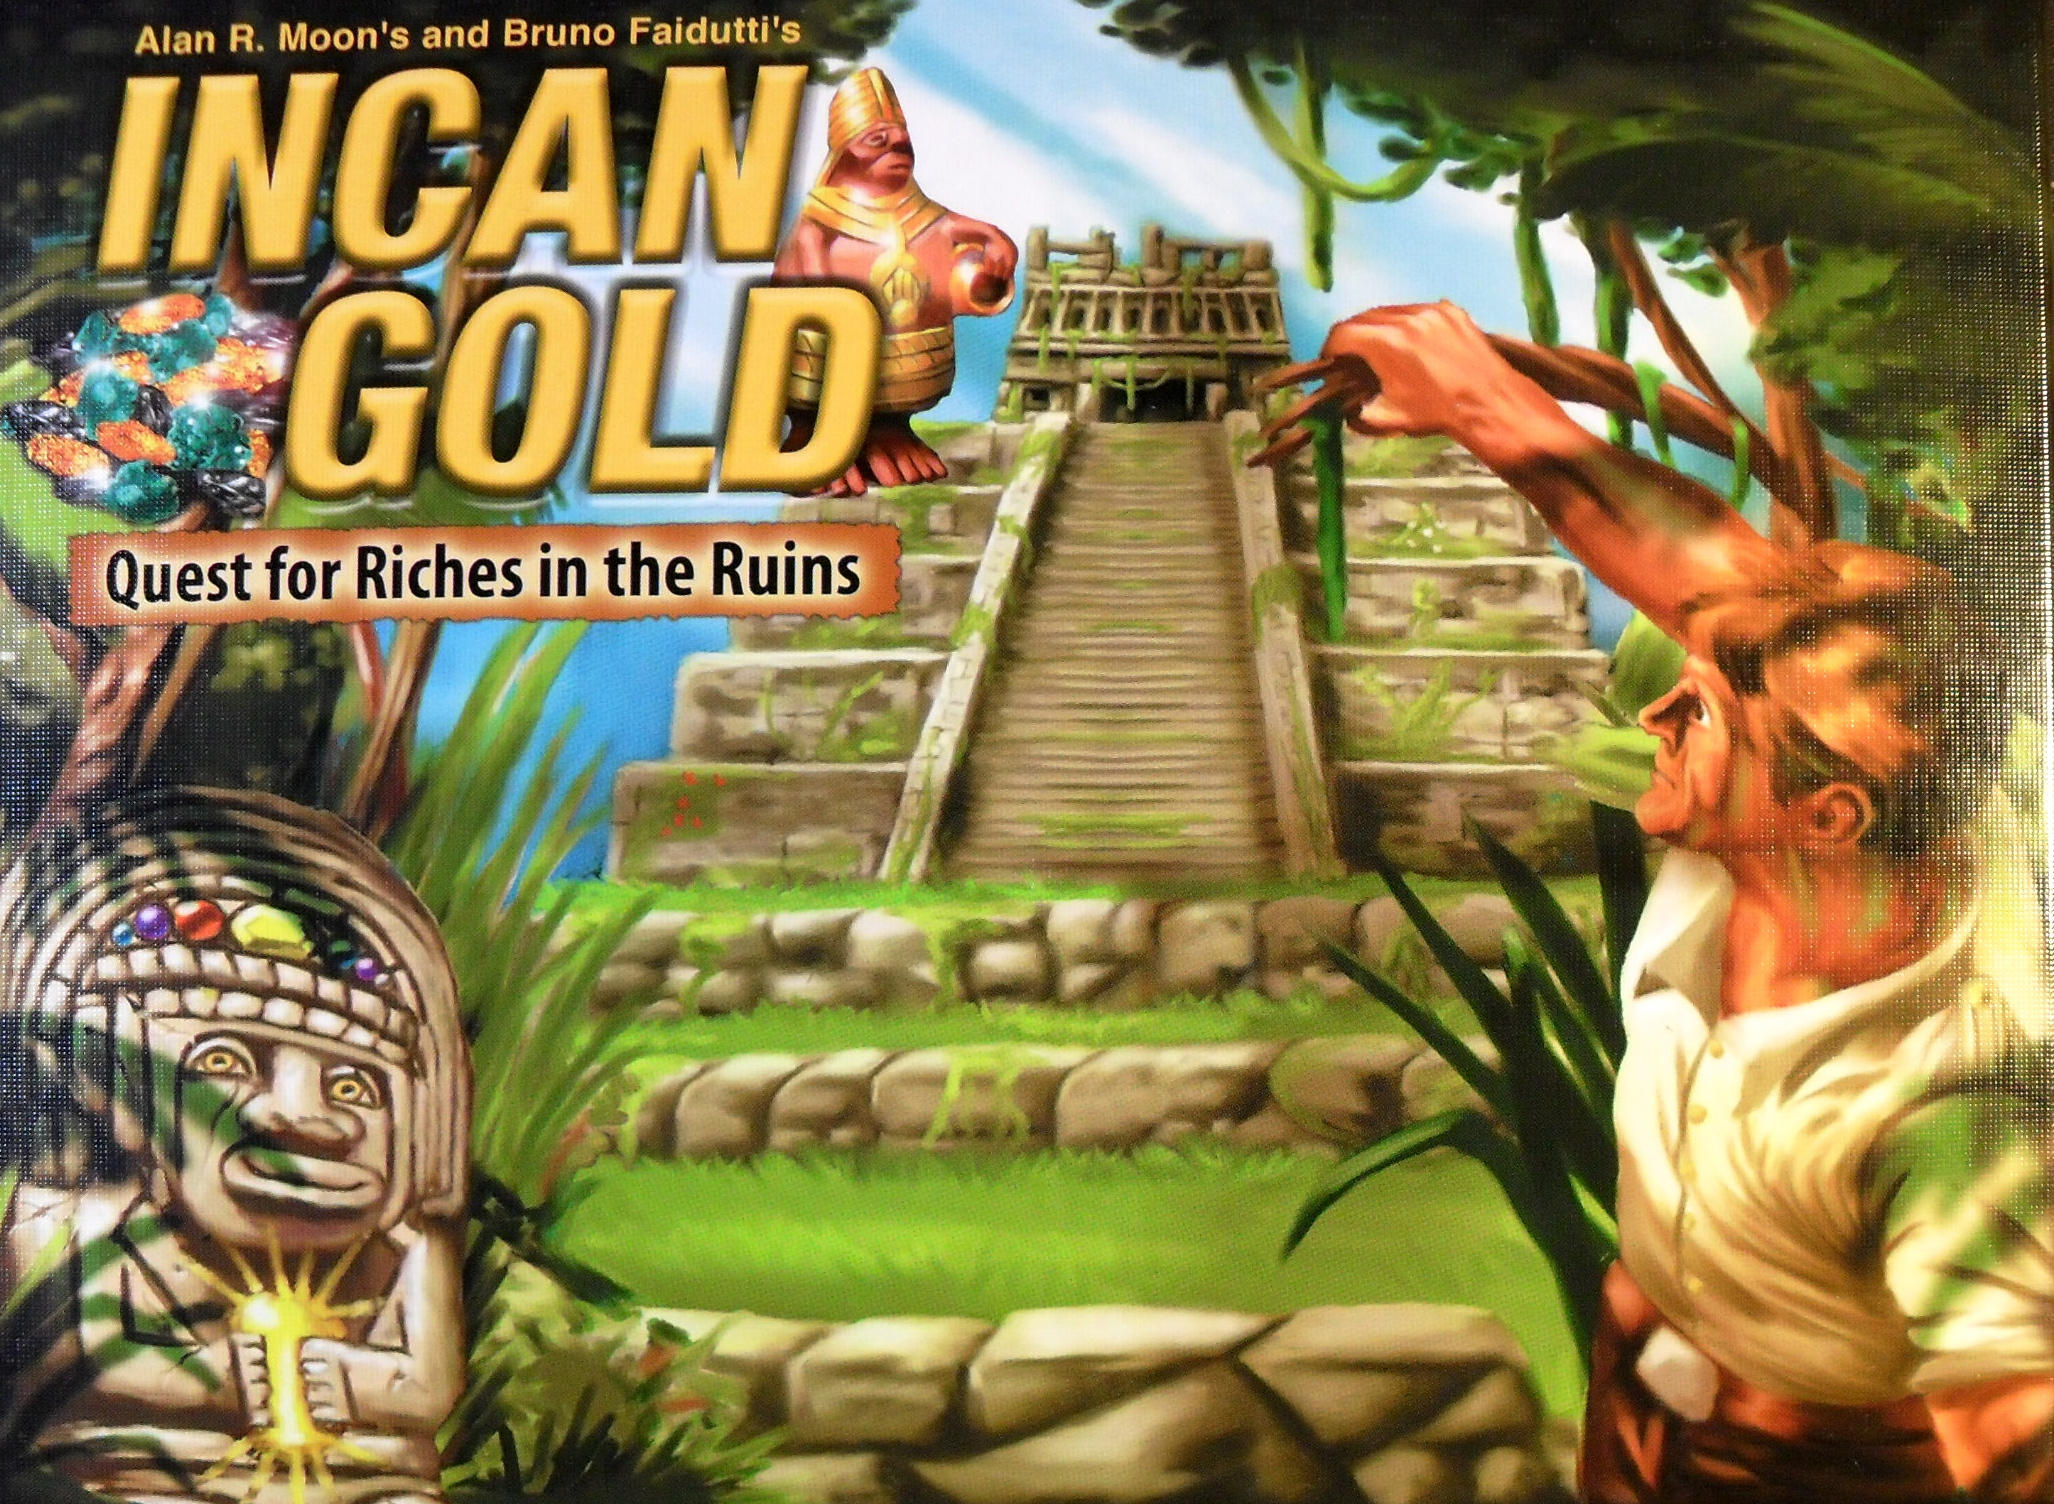 Incan Gold - Quest for Riches in the Ruins (#6)